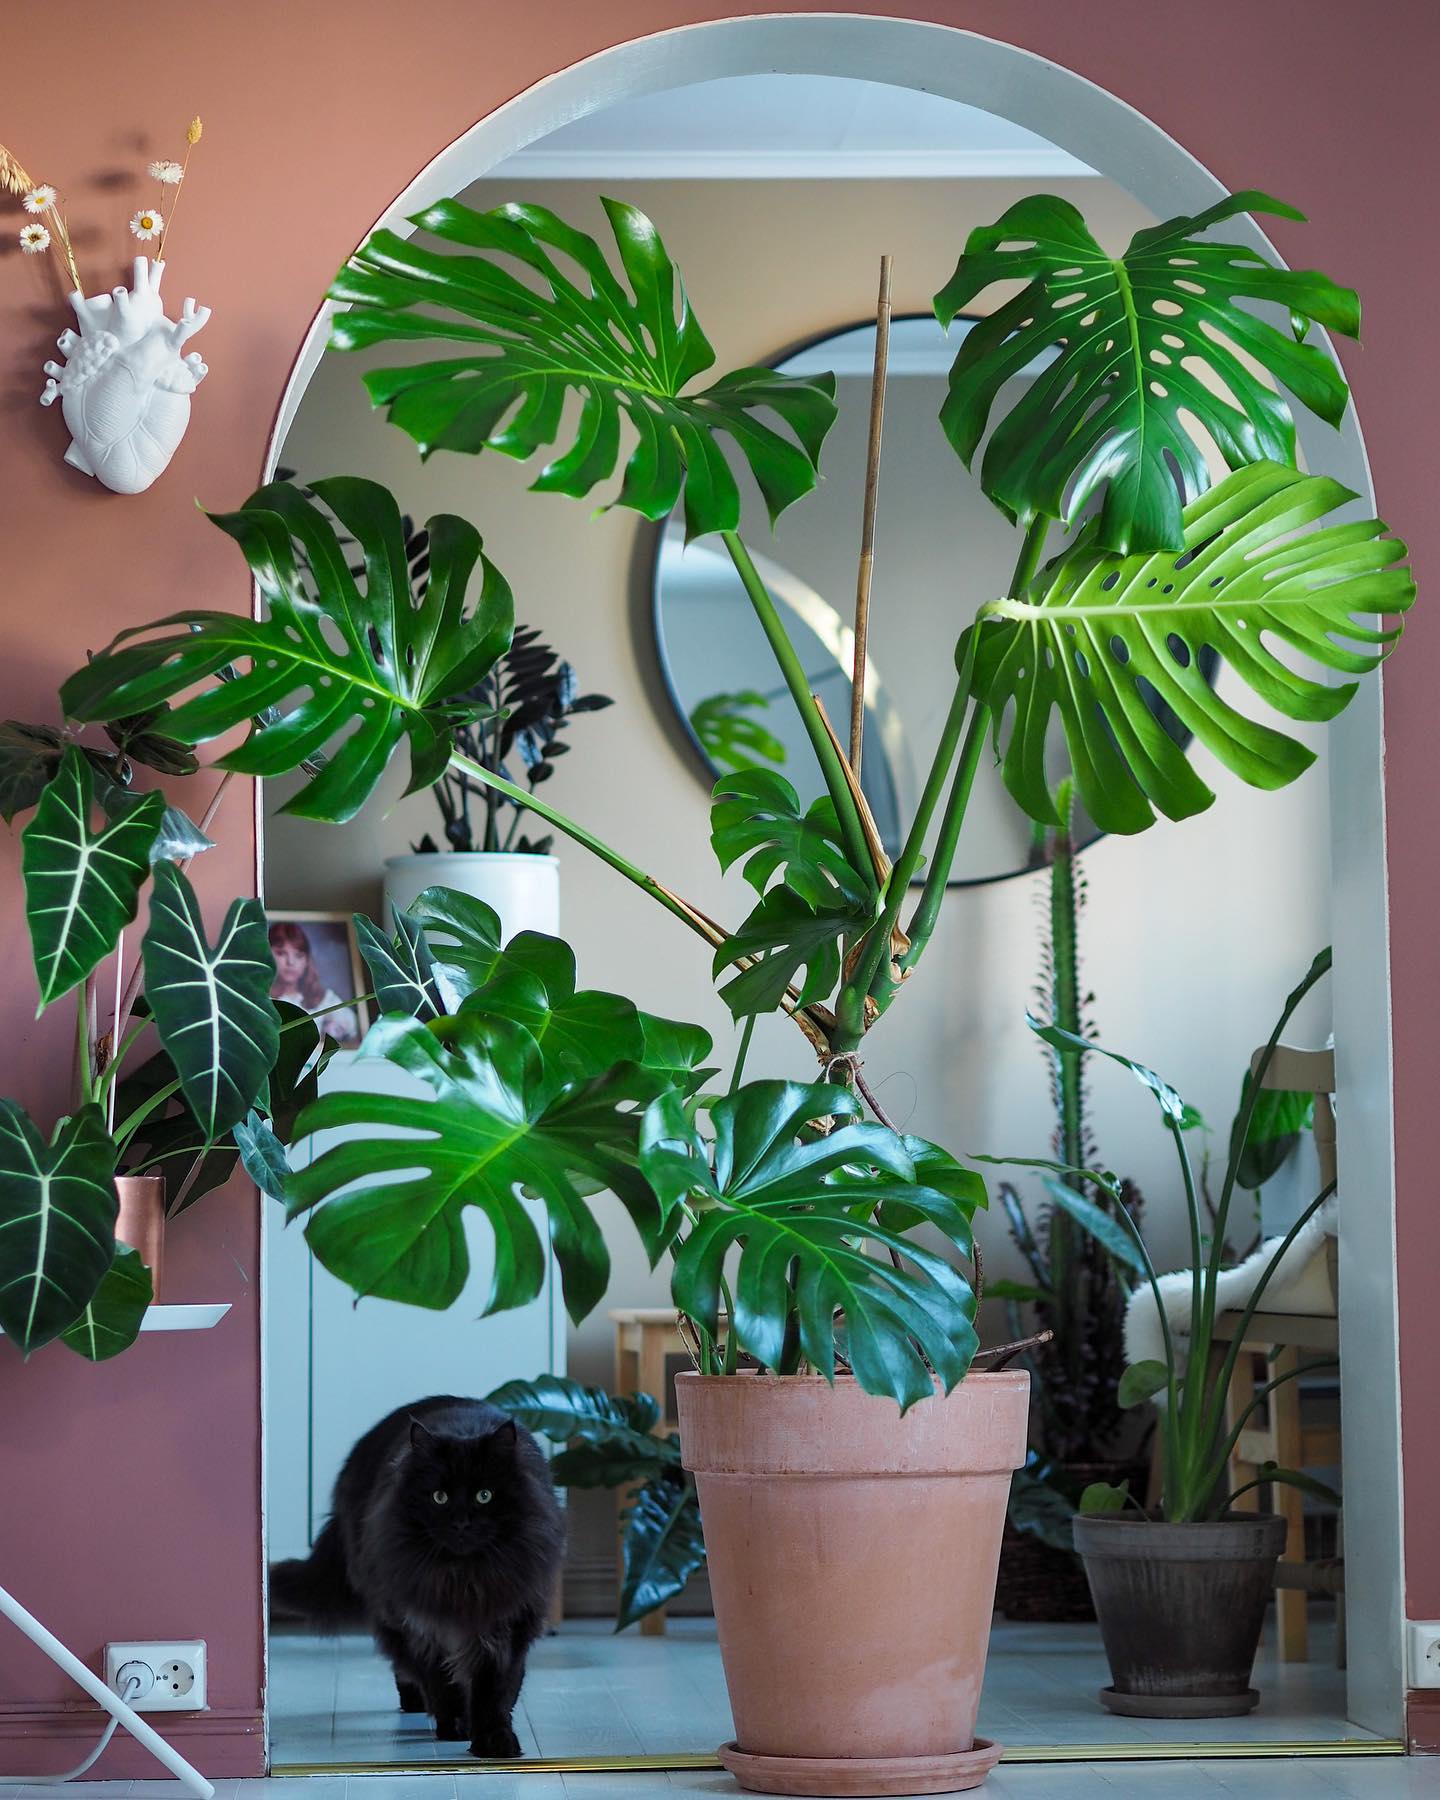 Monstera Deliciosa Houseplant is good for in the shade - on Thursd. 